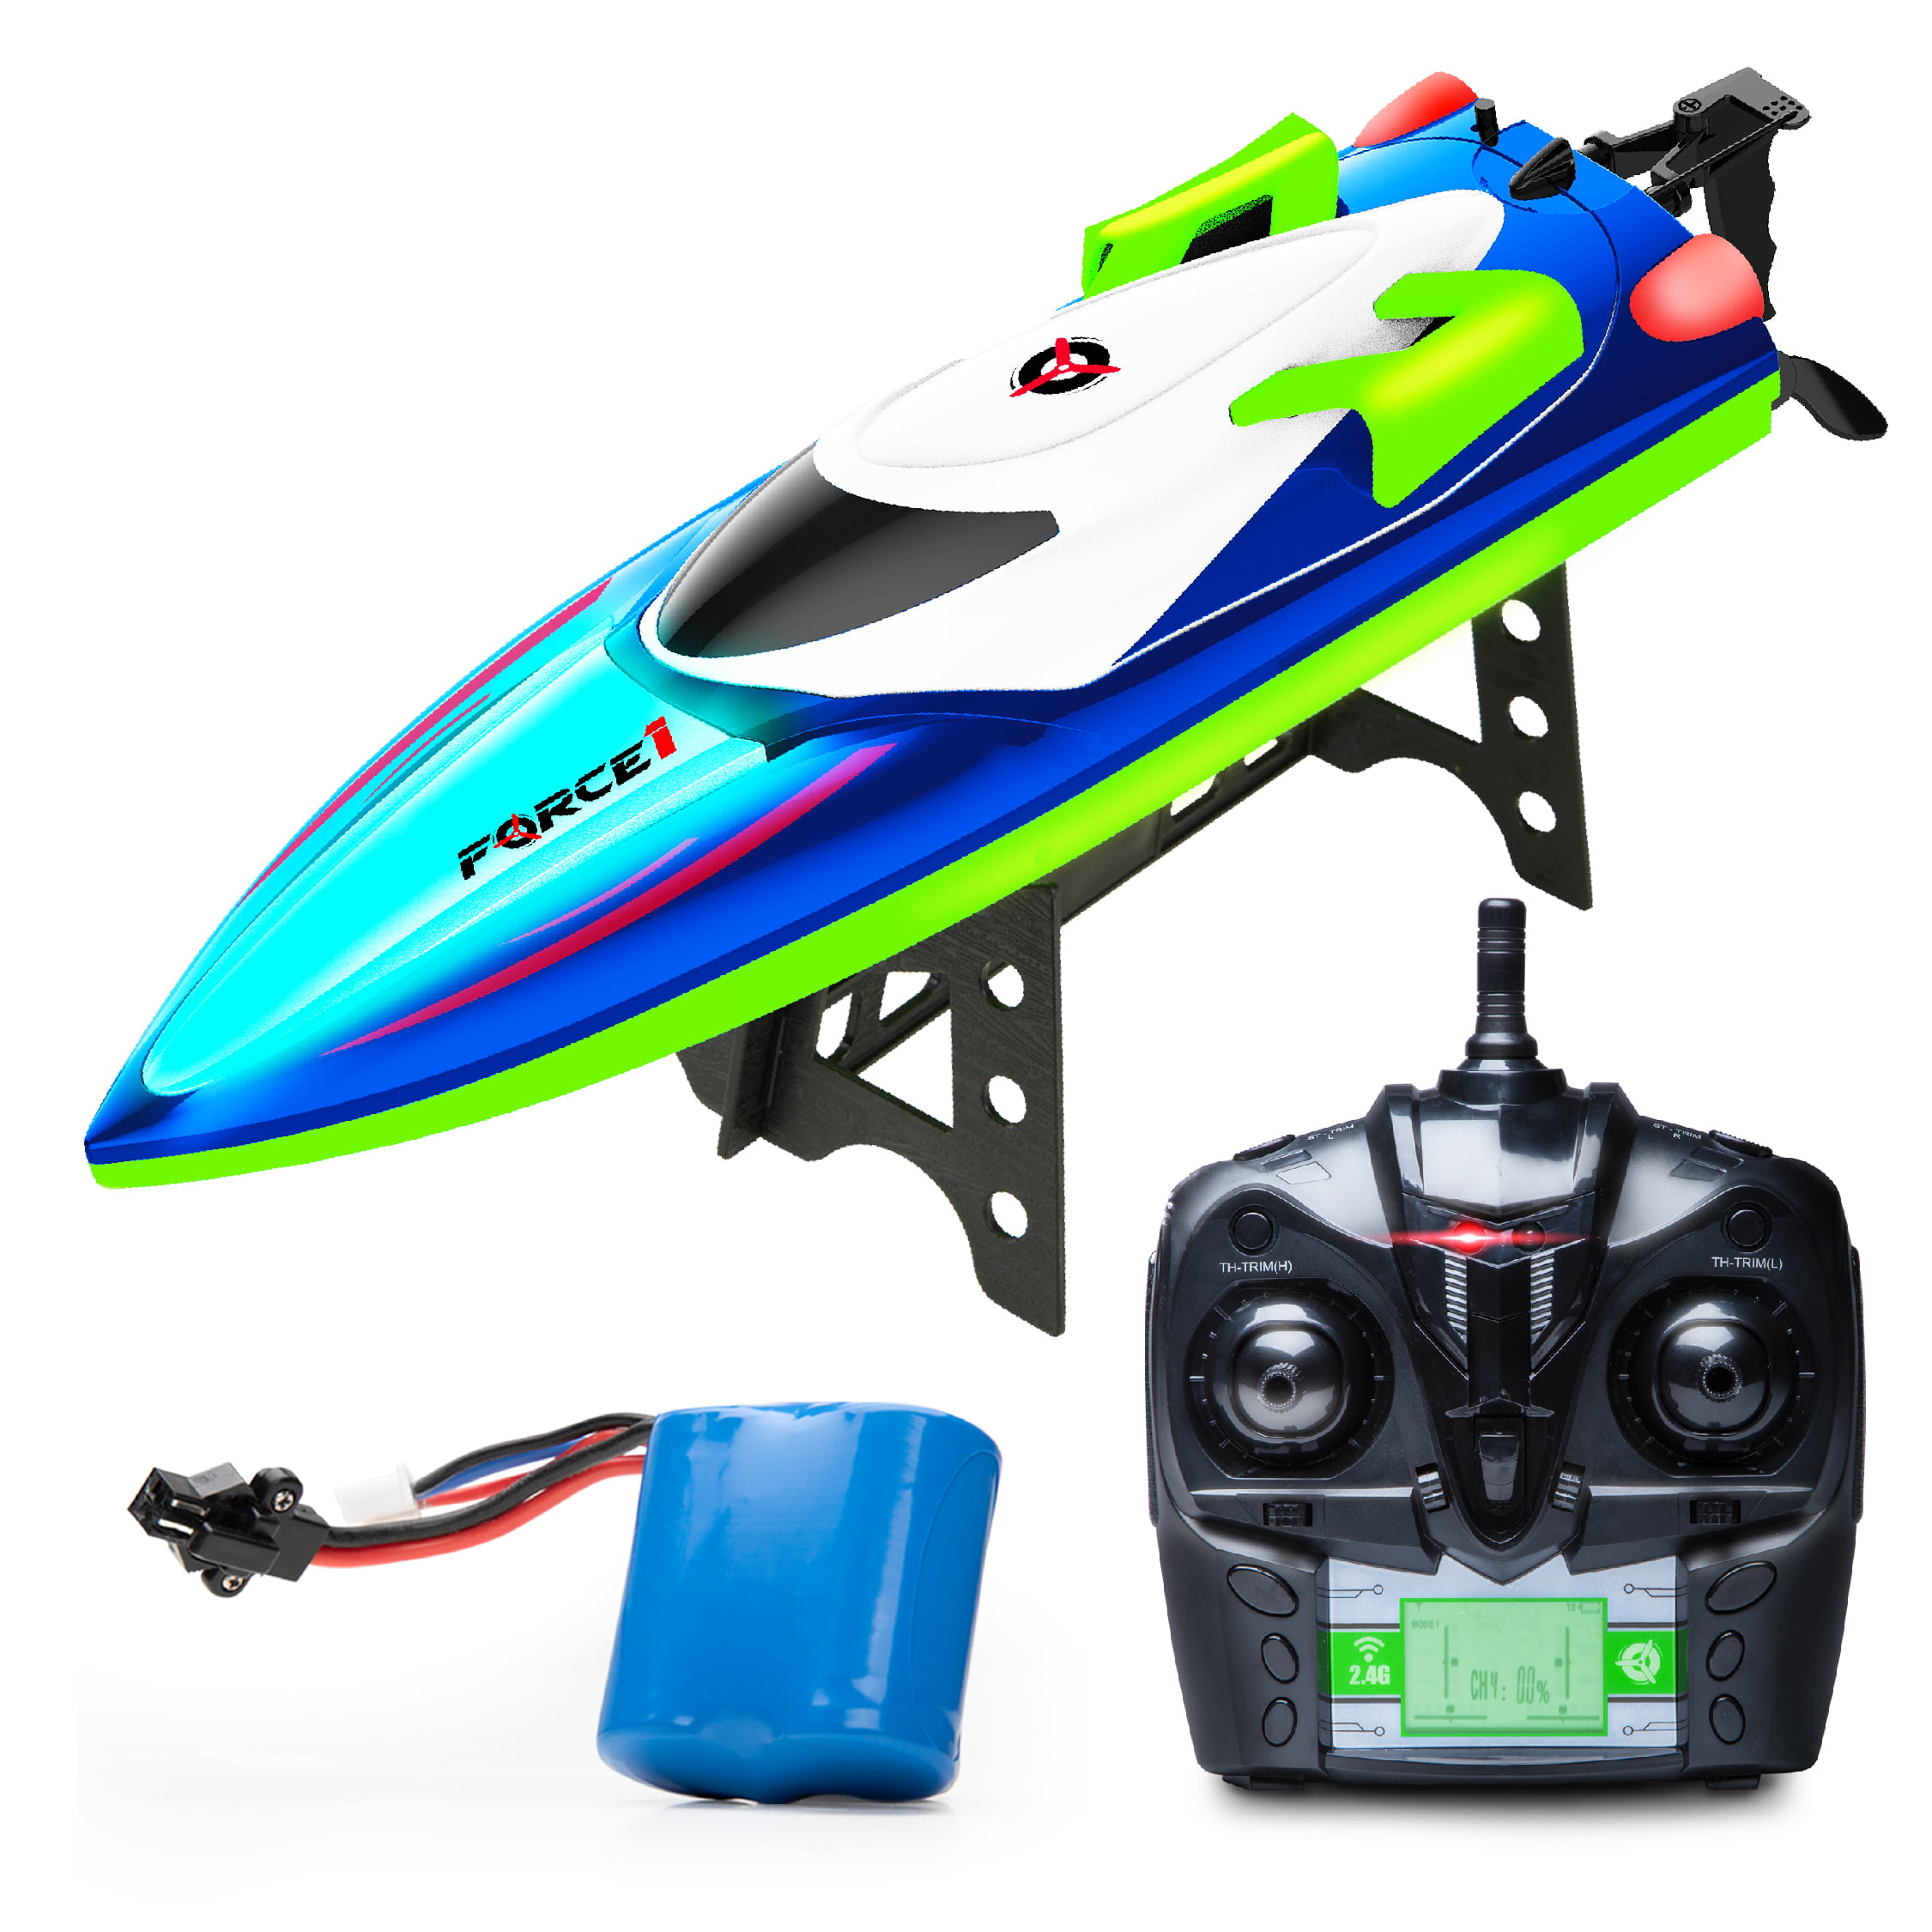 Force1 H102 Remote Control Boats for Pools for sale online 